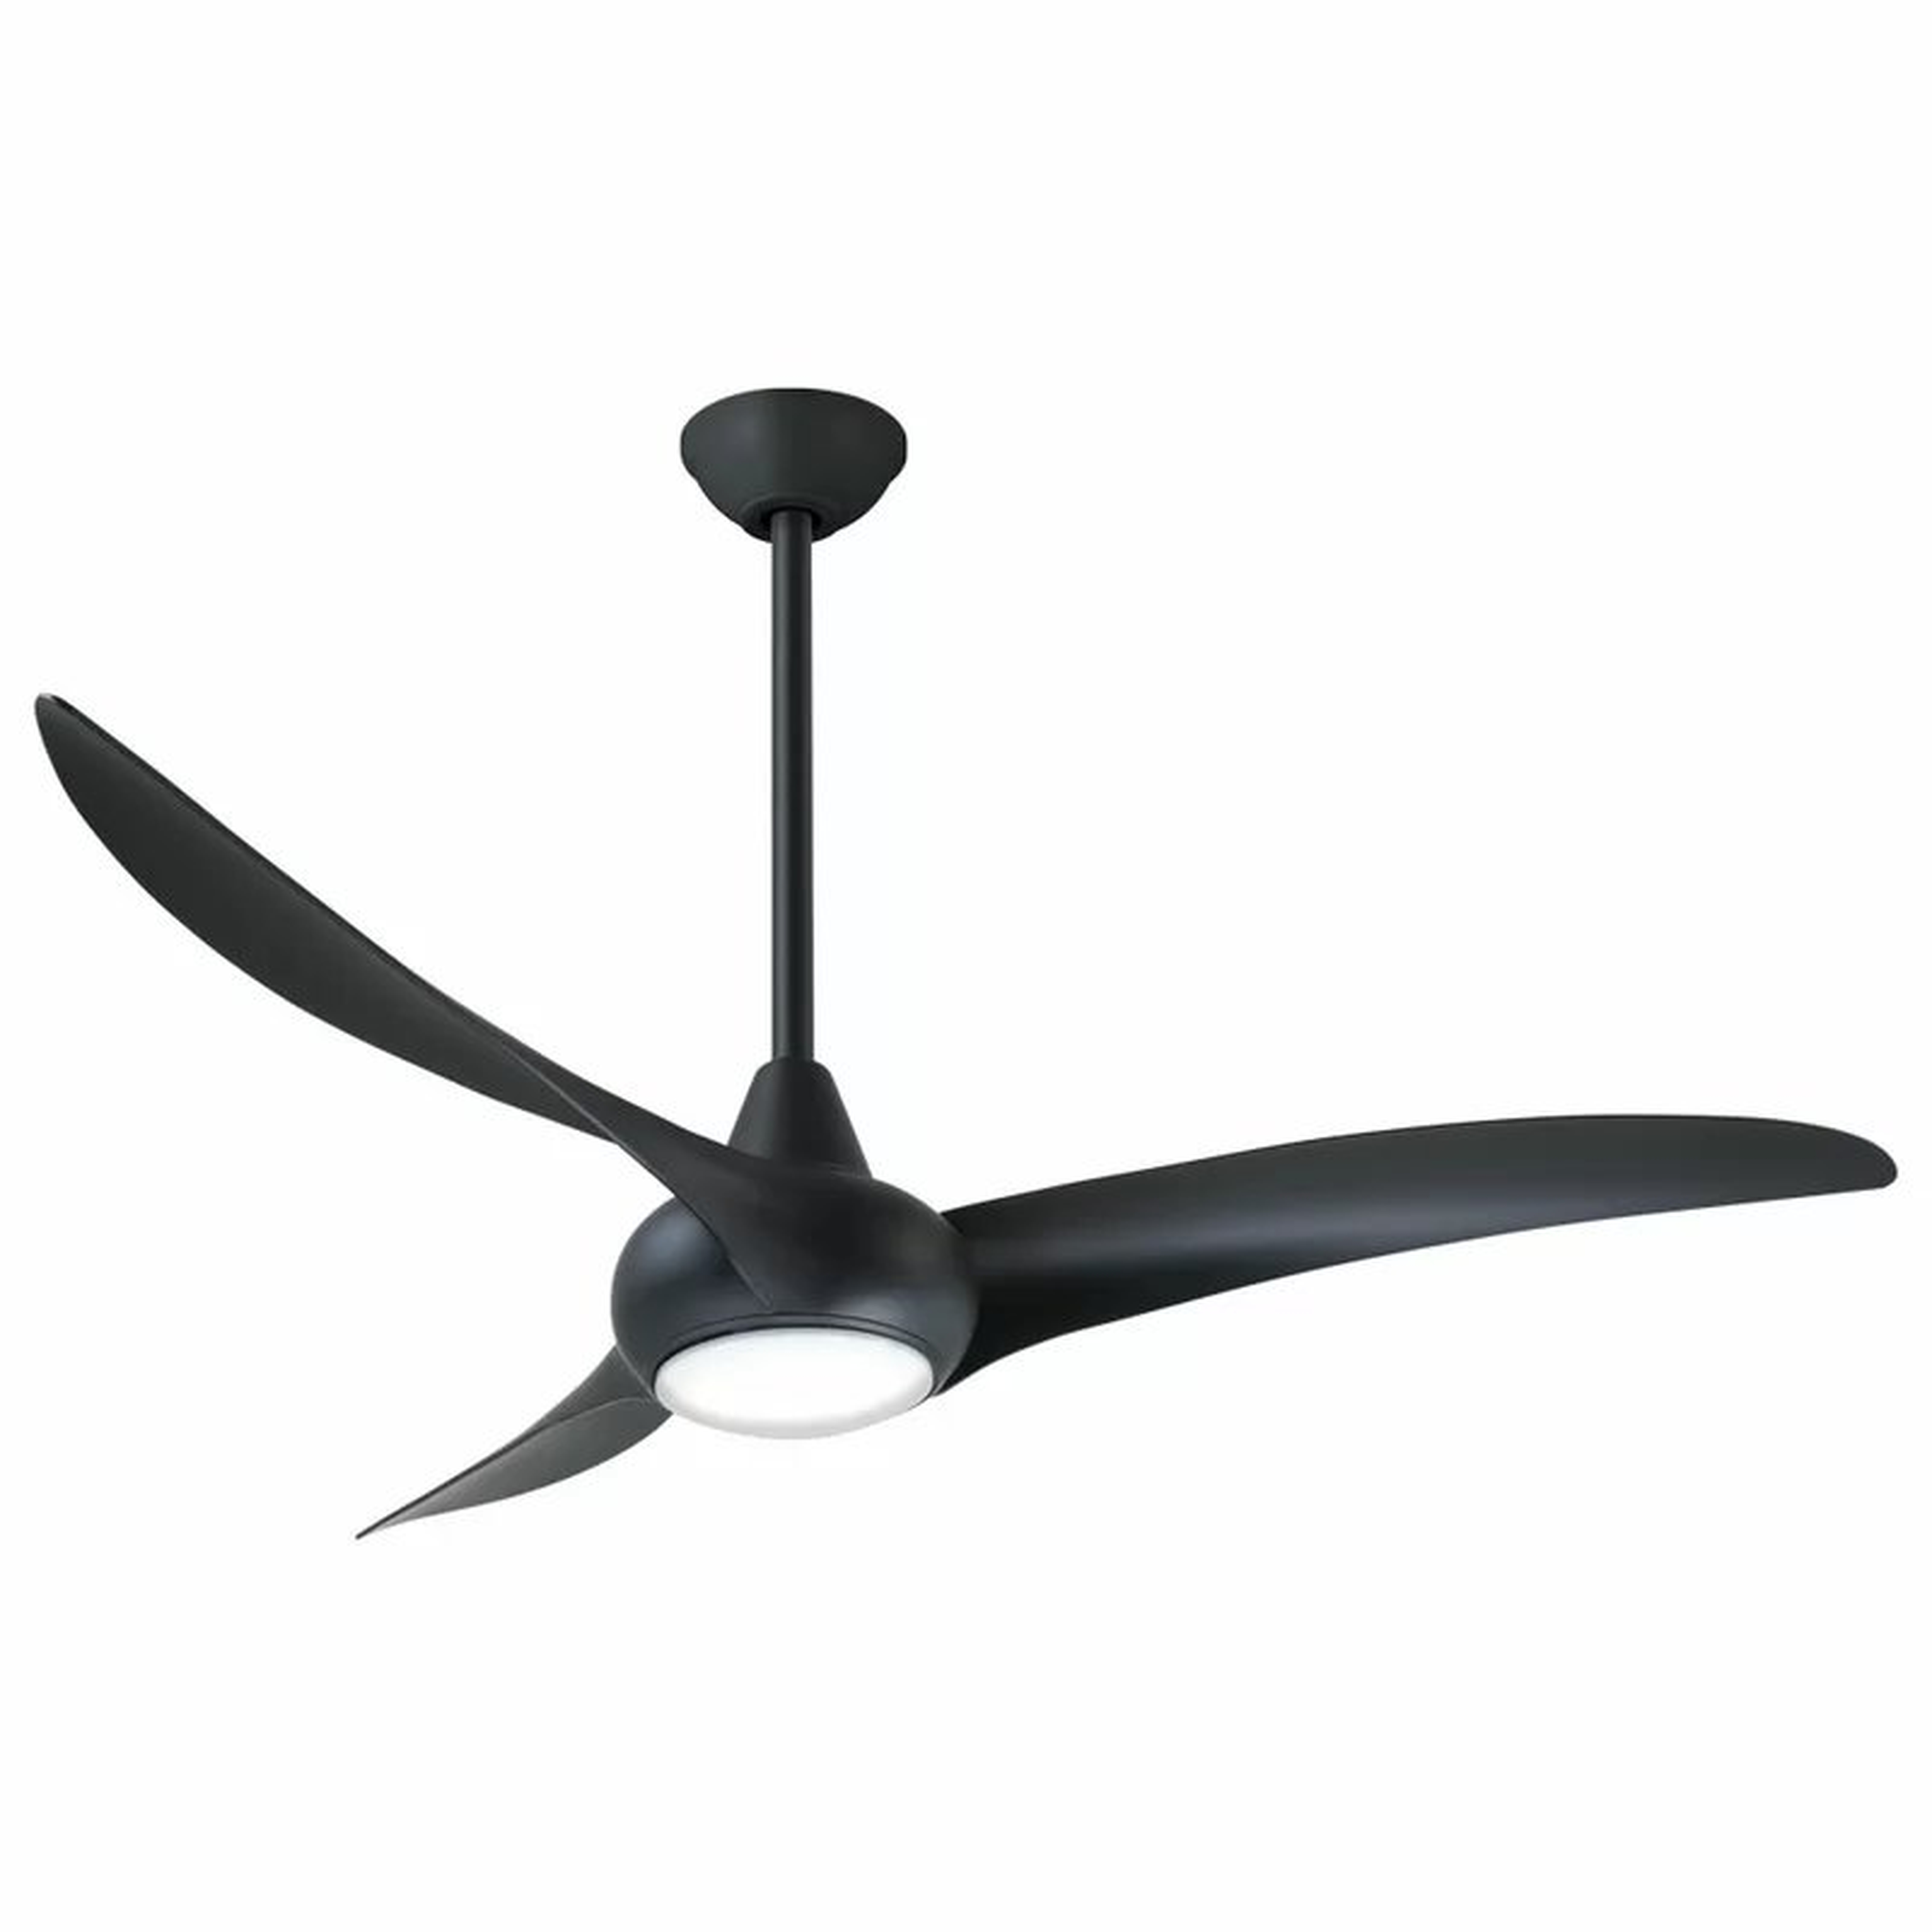 52" Wave 3 - Blade LED Propeller Ceiling Fan with Remote Control and Light Kit Included - Wayfair